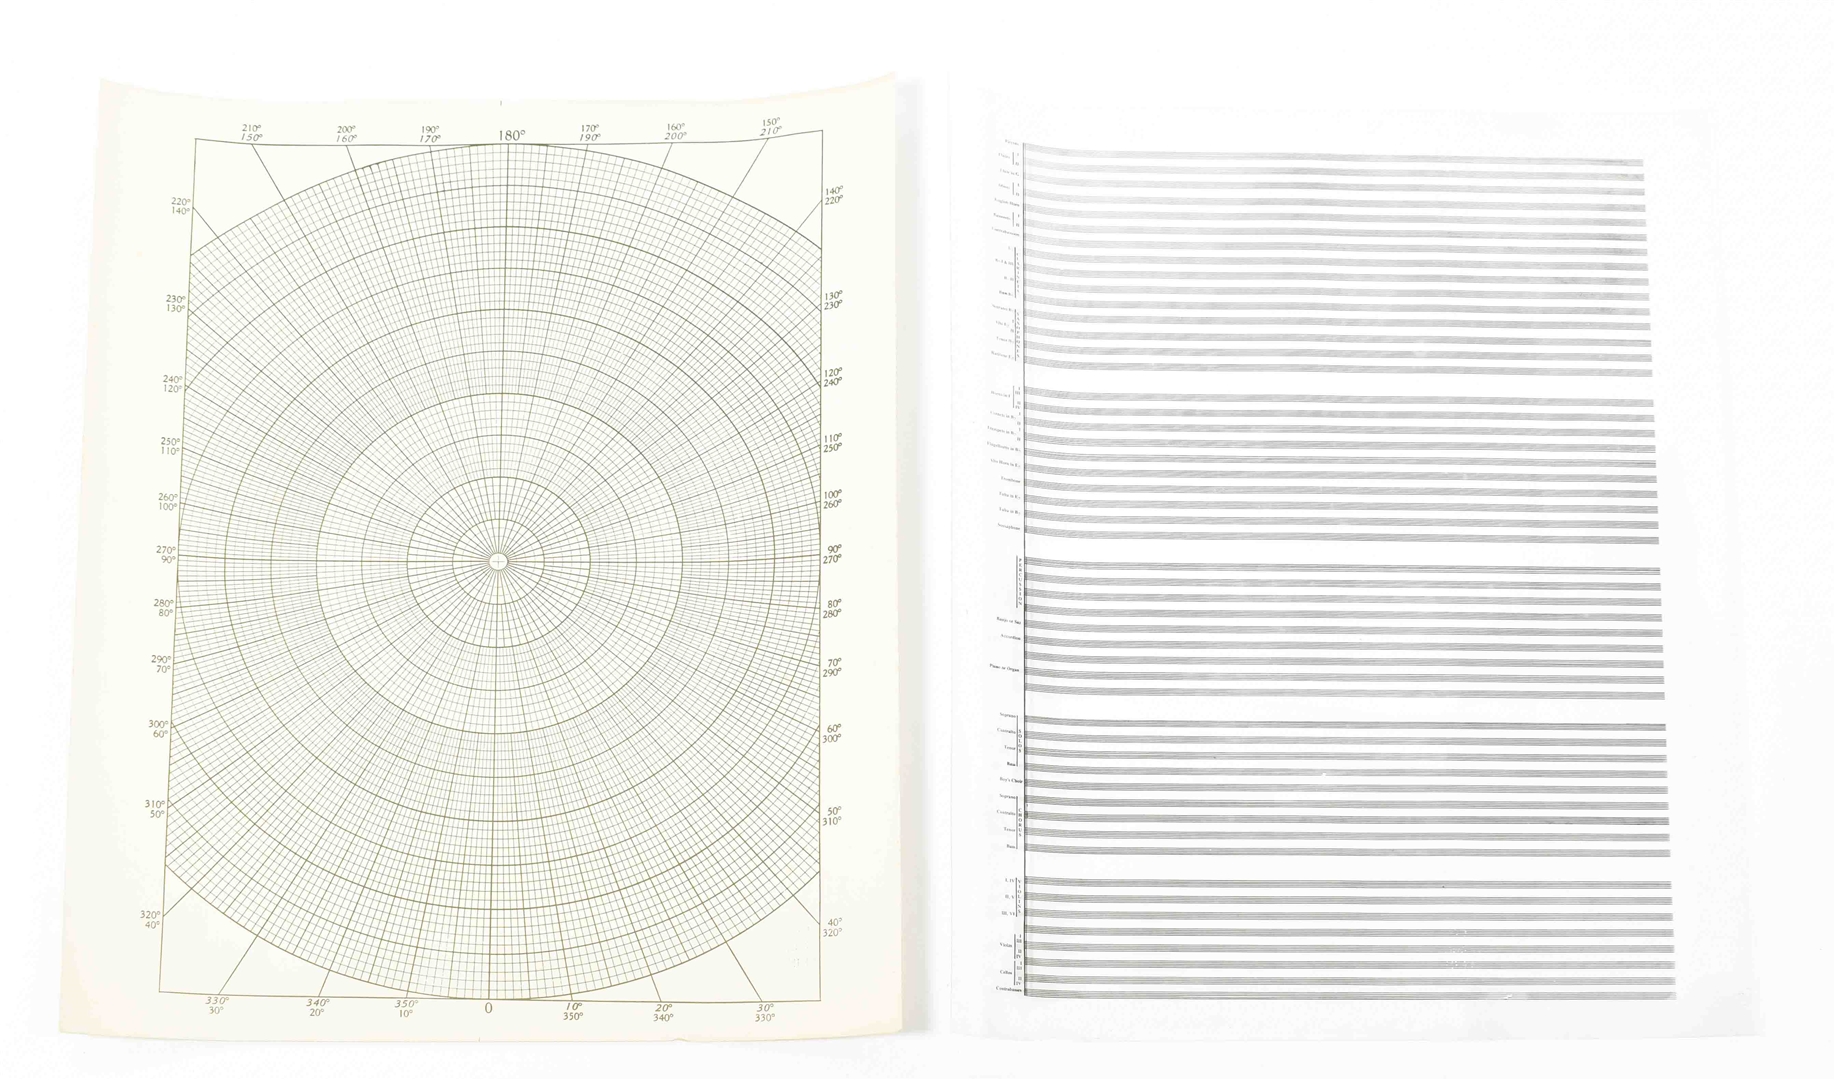 Dick Higgins, Wipe Out for Orchestra/ Softly for Orchestra (Graphis No.144 and 143)